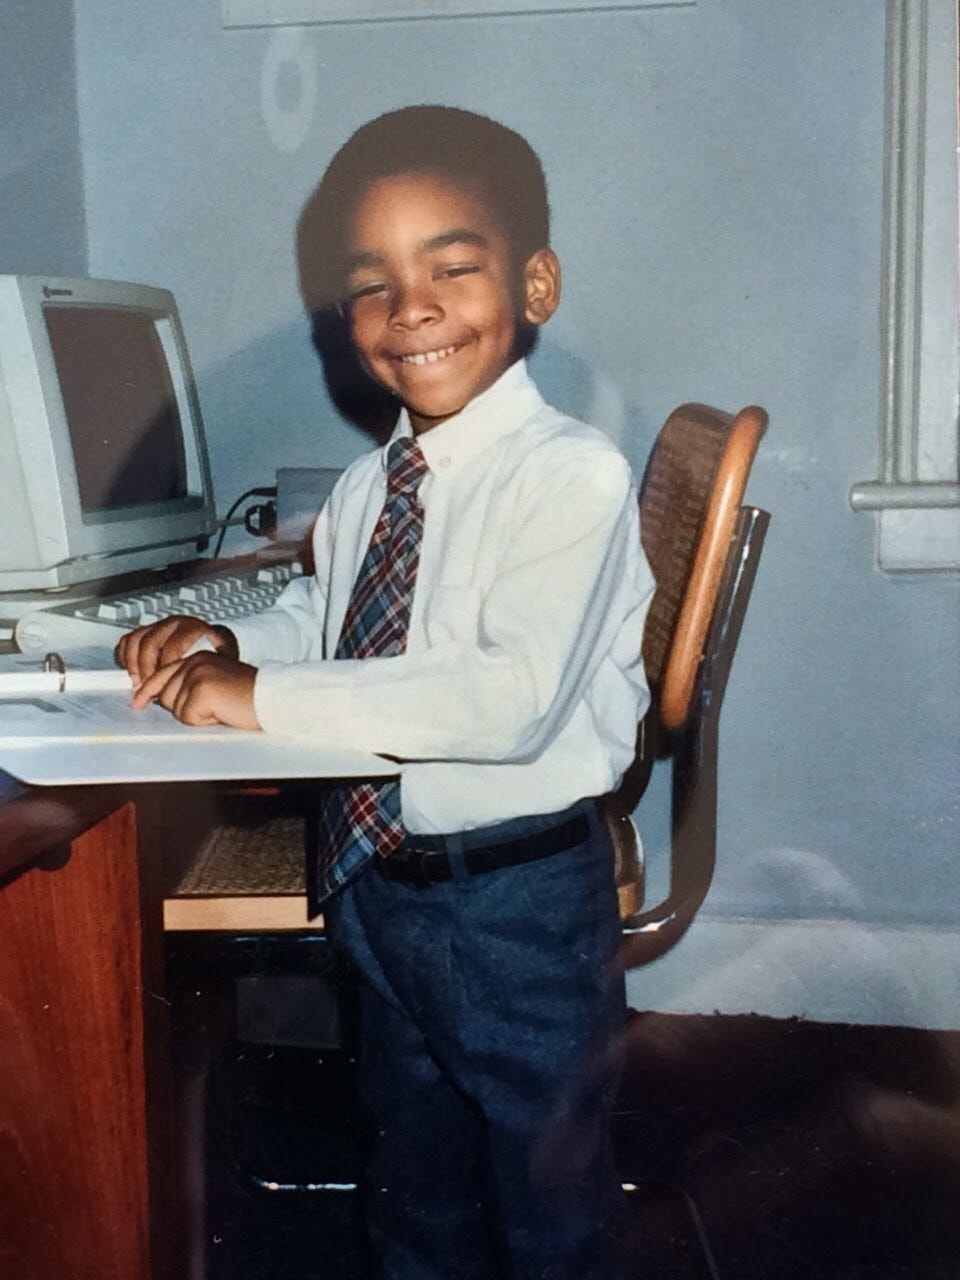 Tomik Dash as a toddler, wearing a white shirt, tie, and dark trousers, with a cheerful smile, sitting at an older computer model in a room with blue walls. Tomik is pointing at a sheet of paper in a white three-ring binder that sits atop a wooden desk.